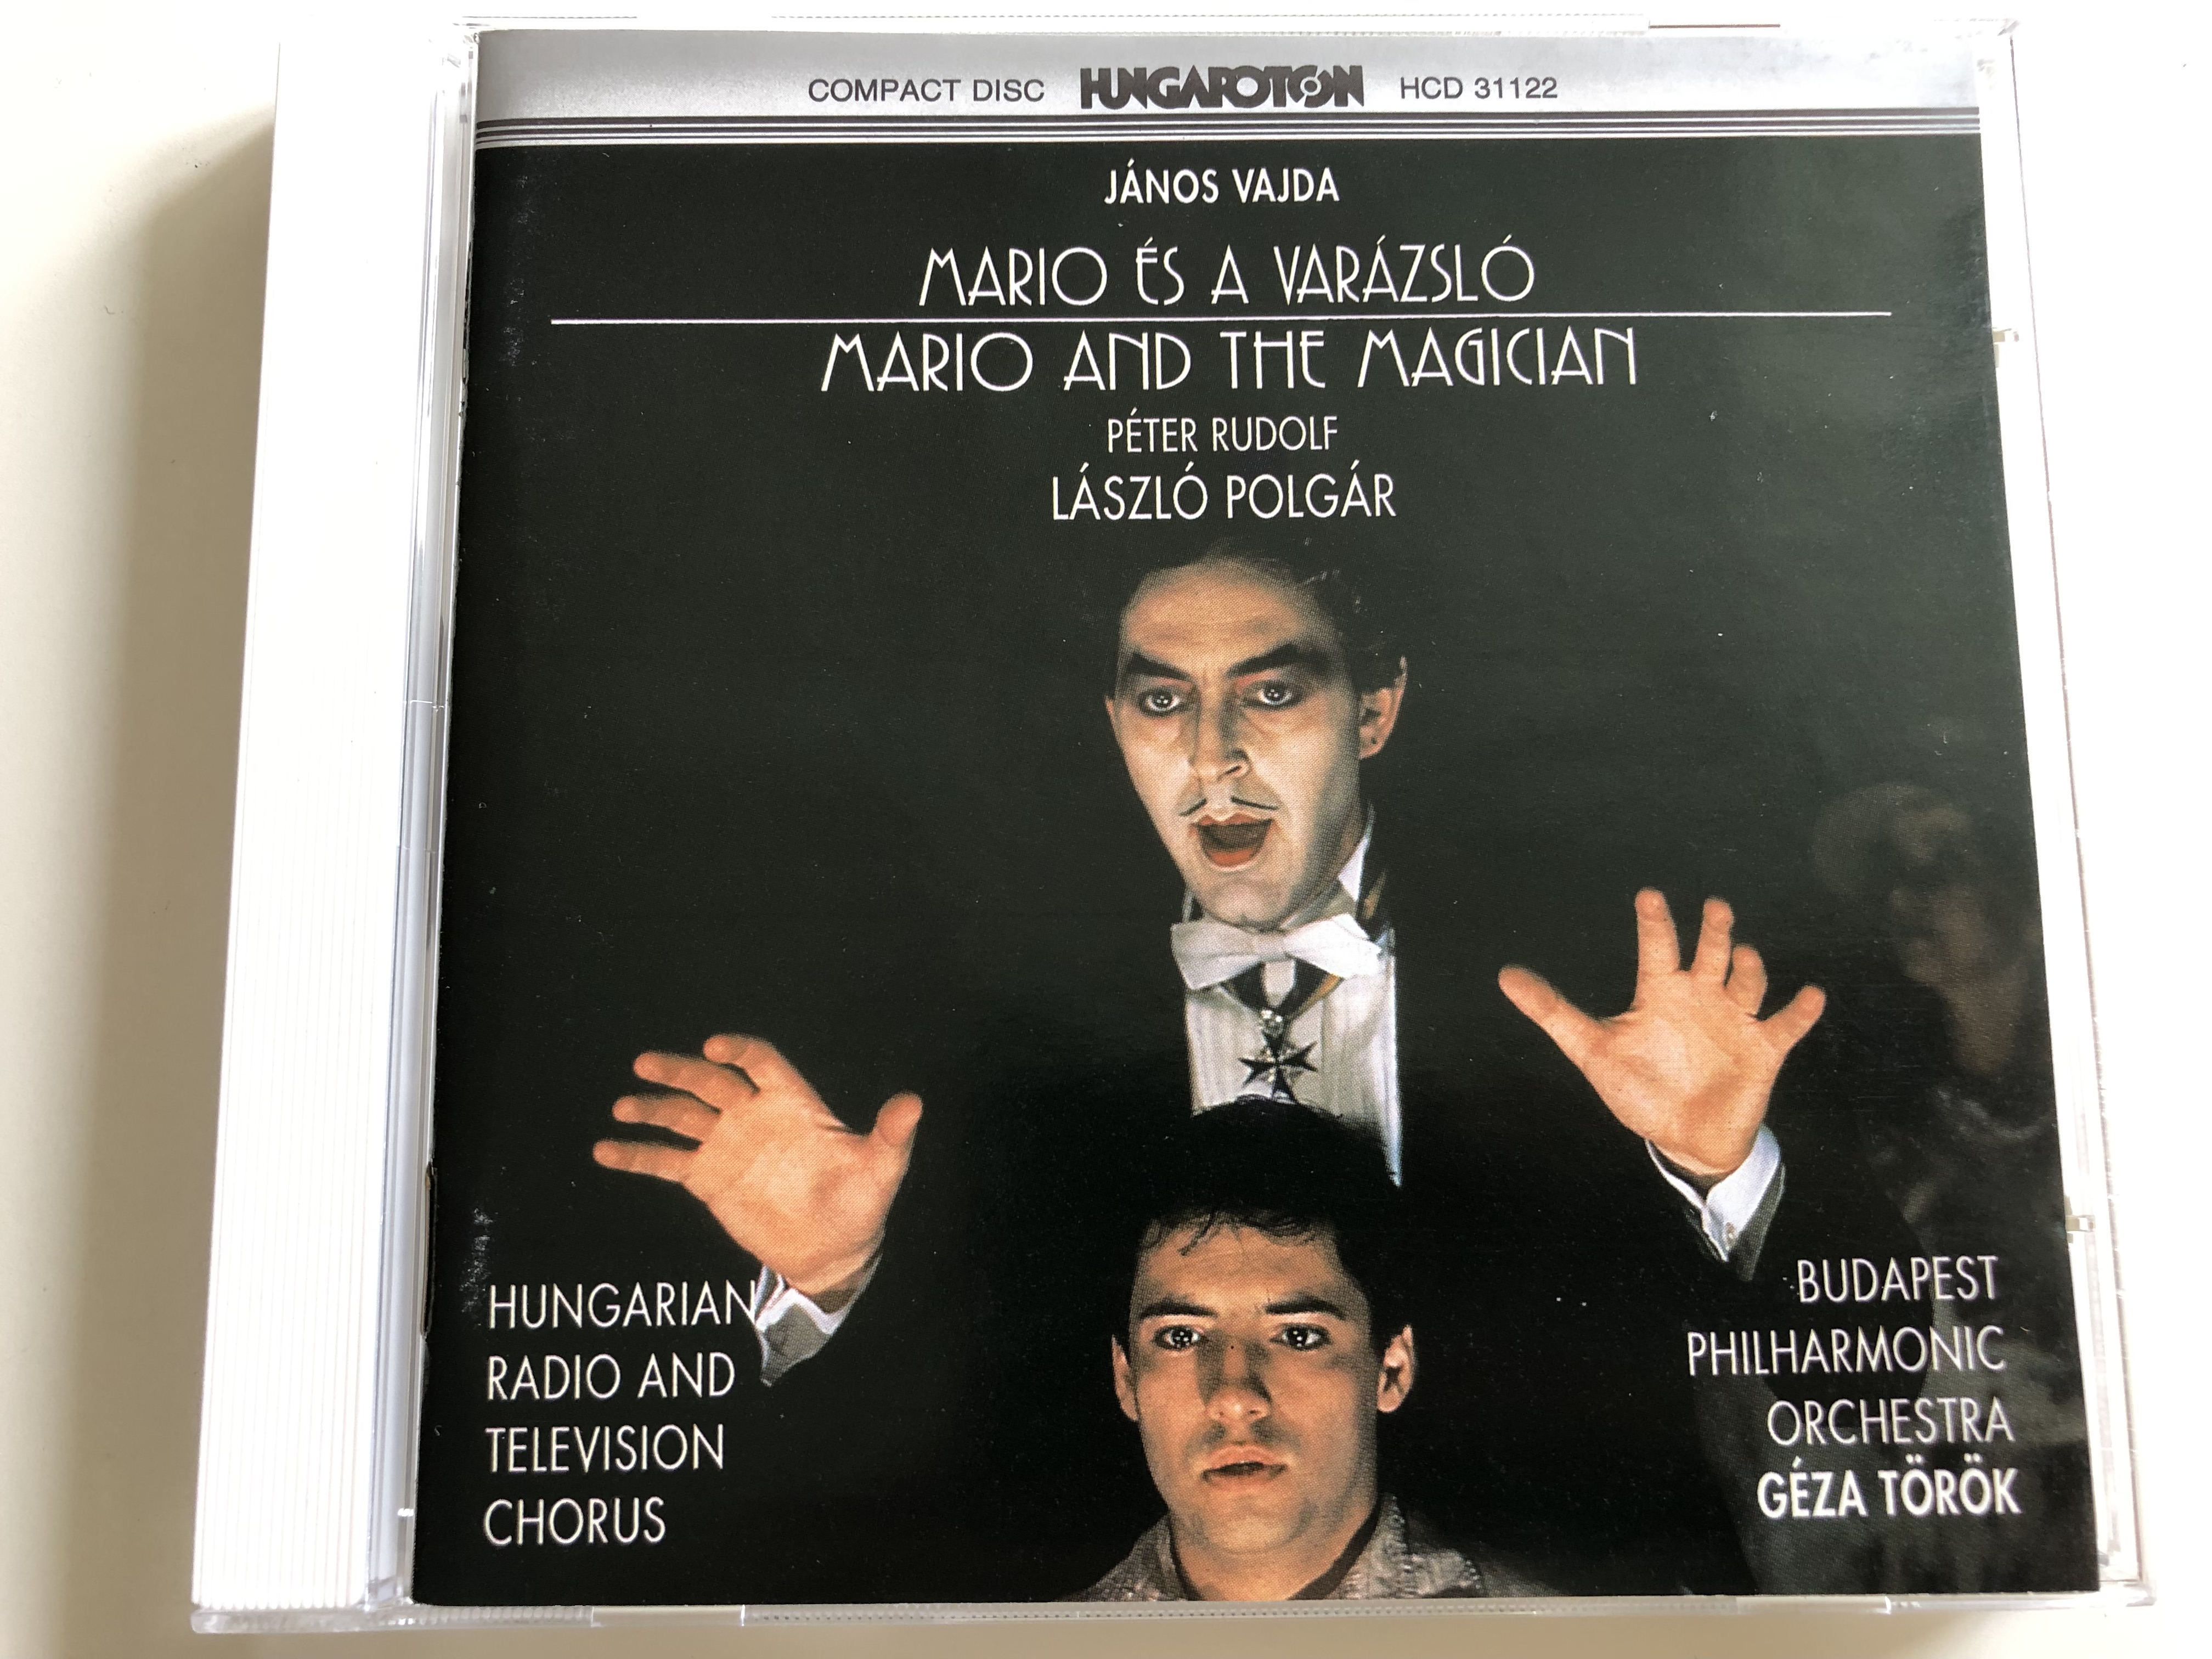 j-nos-vajda-m-ri-s-a-var-zsl-mario-and-the-magician-opera-in-one-act-audio-cd-1990-hungarian-radio-and-television-chorus-budapest-philharmonic-orchestra-conducted-by-g-za-t-r-k-hungaroton-hcd-31122-1-.jpg